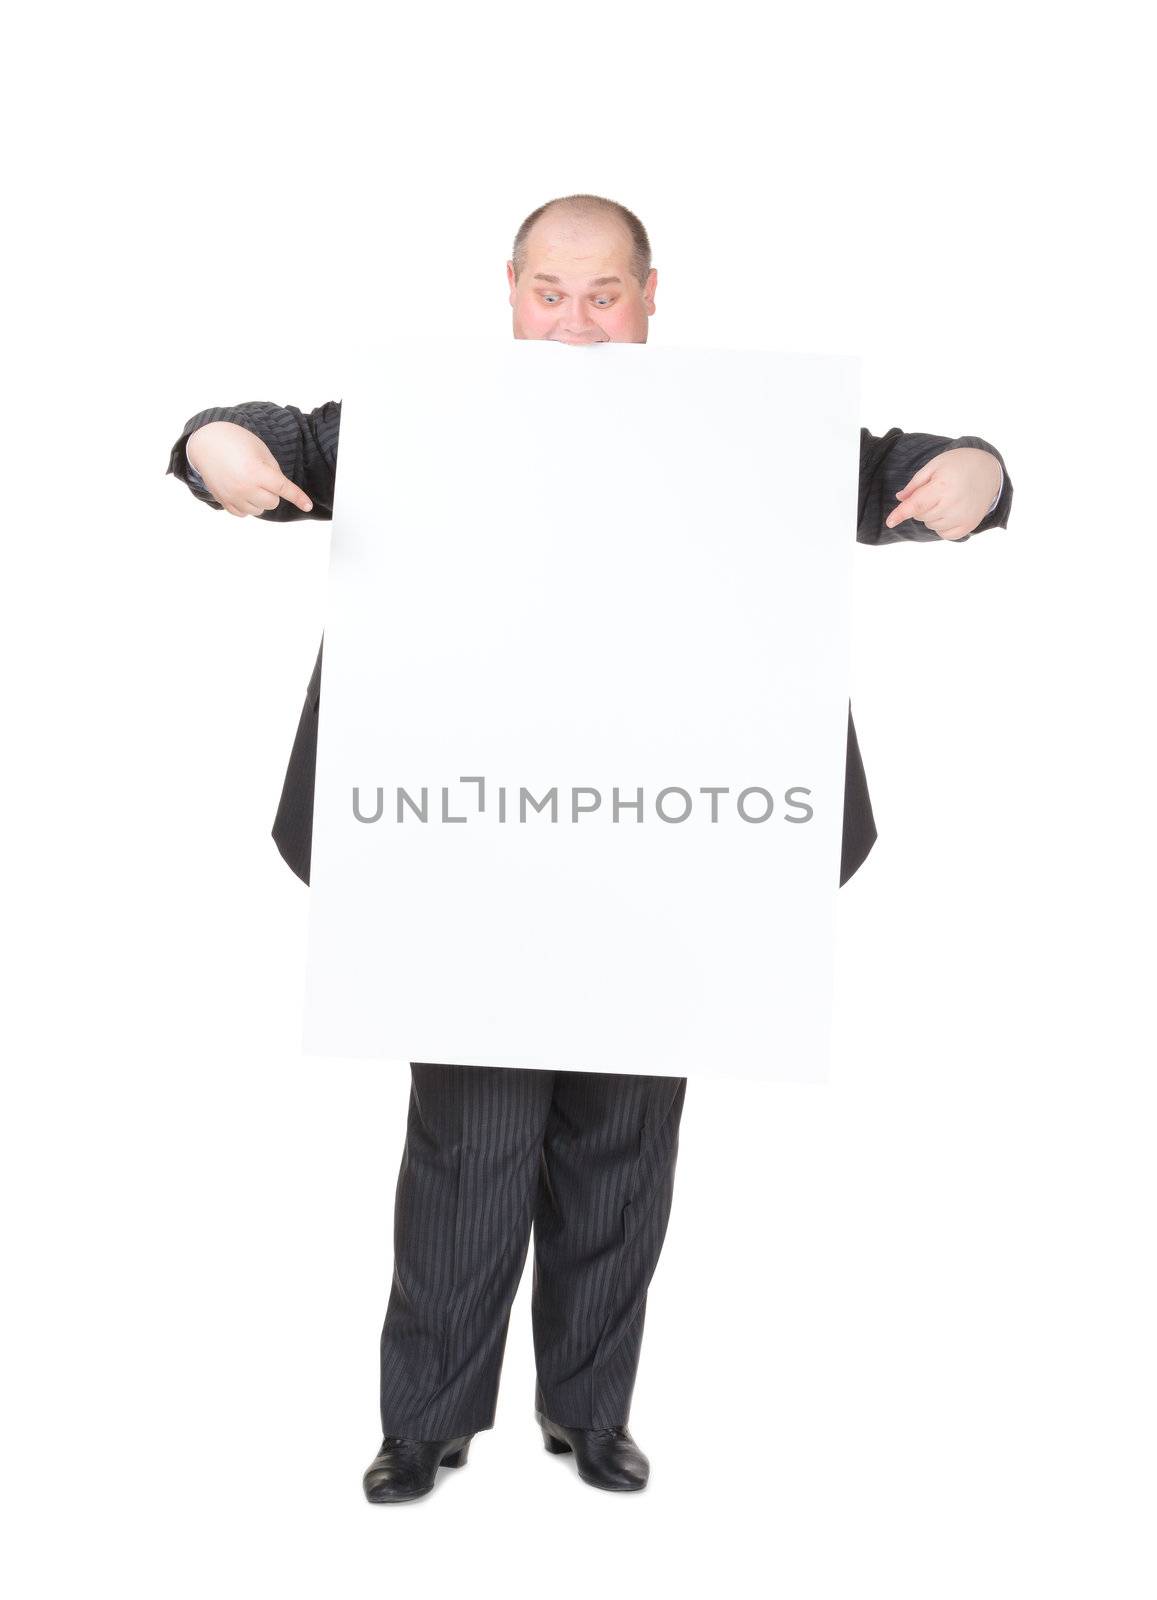 Cheerful overweight stylish business man in a suit holding up a blank white sign and pointing to it with his finger on a white studio background